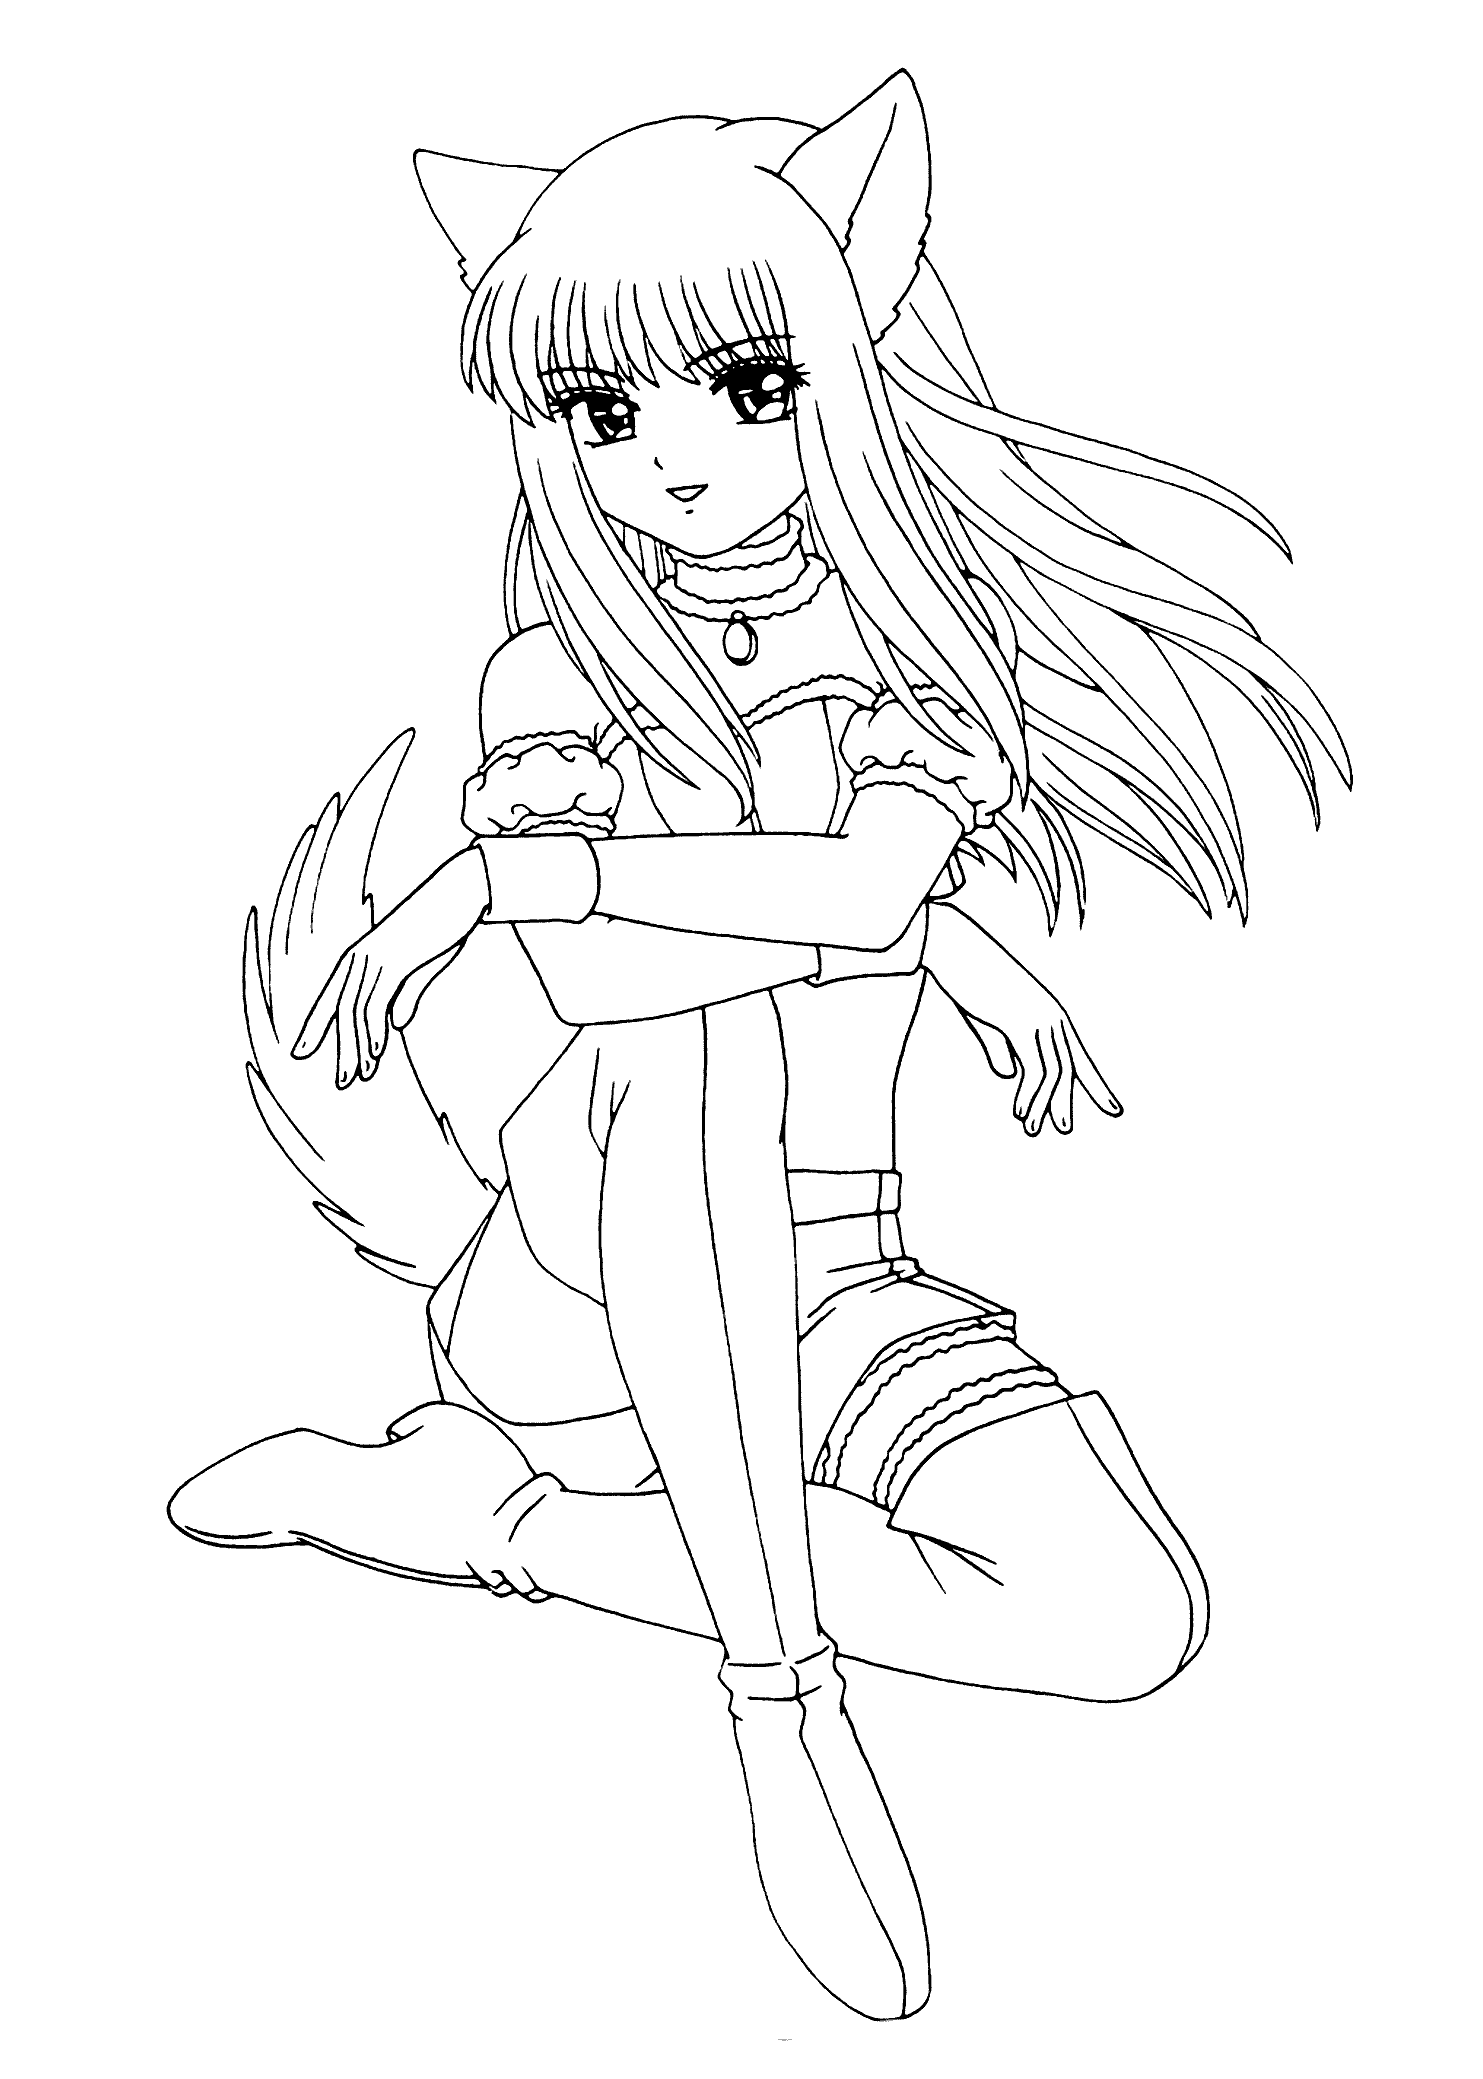 Anime Cat Girl Coloring Pages To Print - Coloring Pages For All Ages